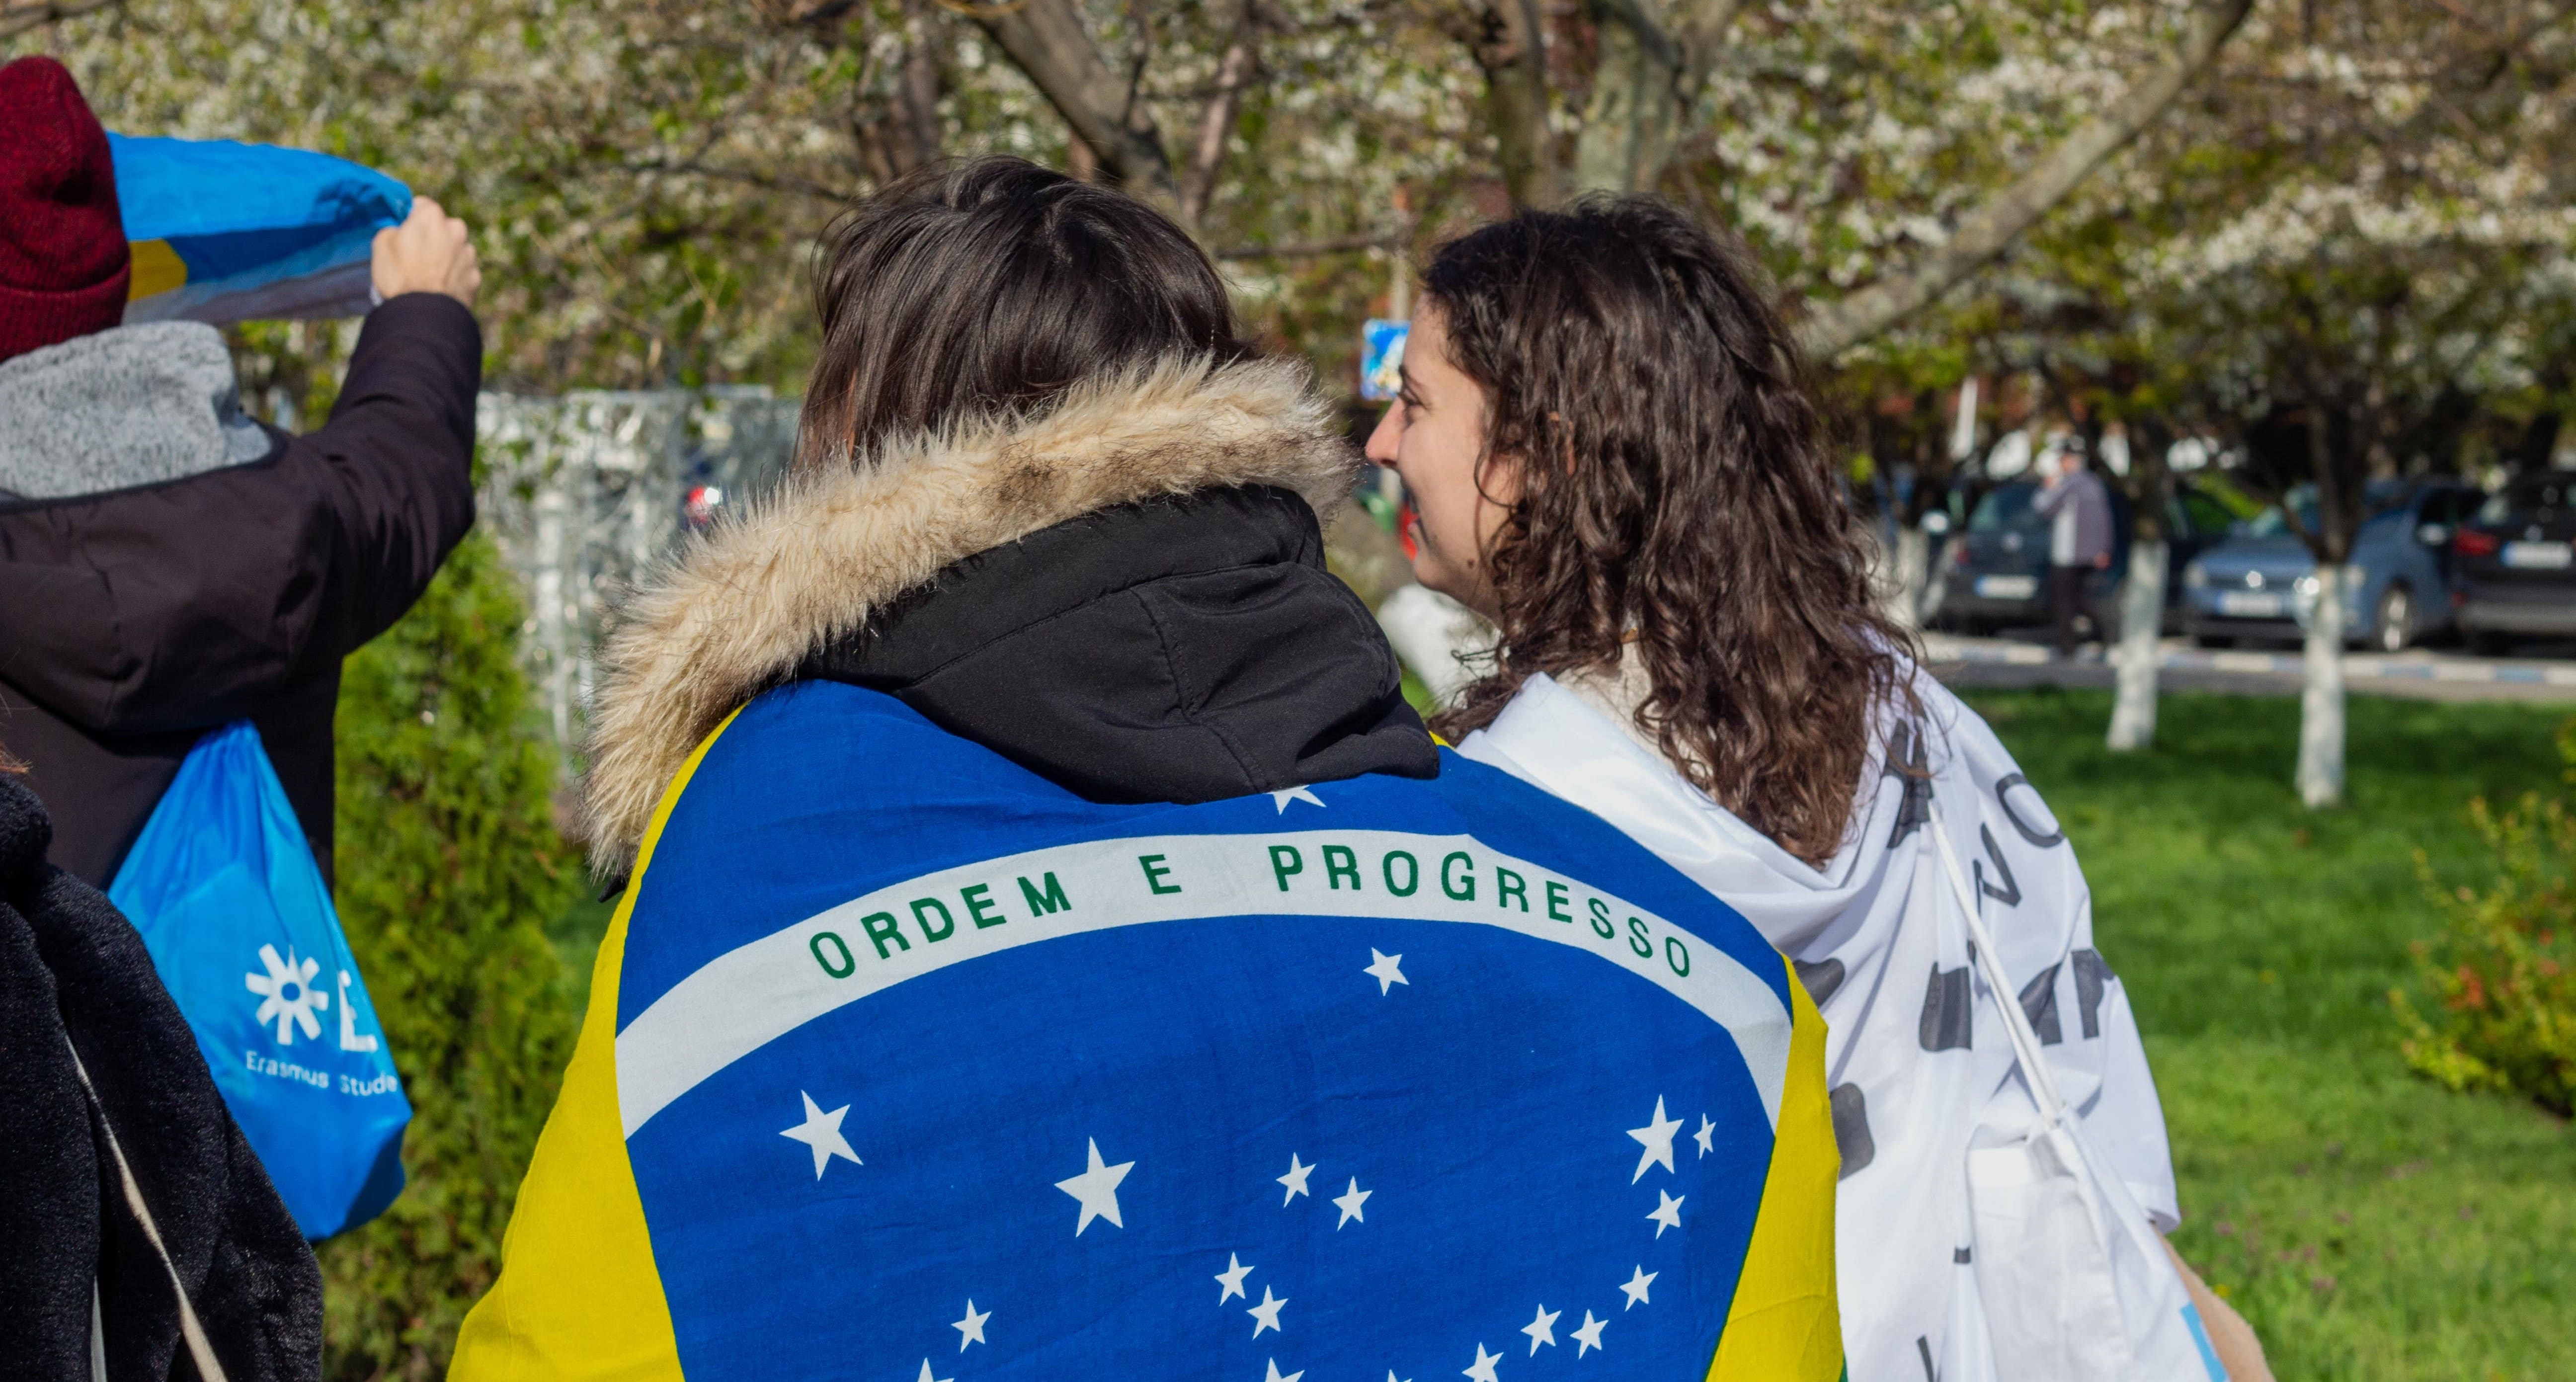 A photo of two people from the back wrapped in flags.